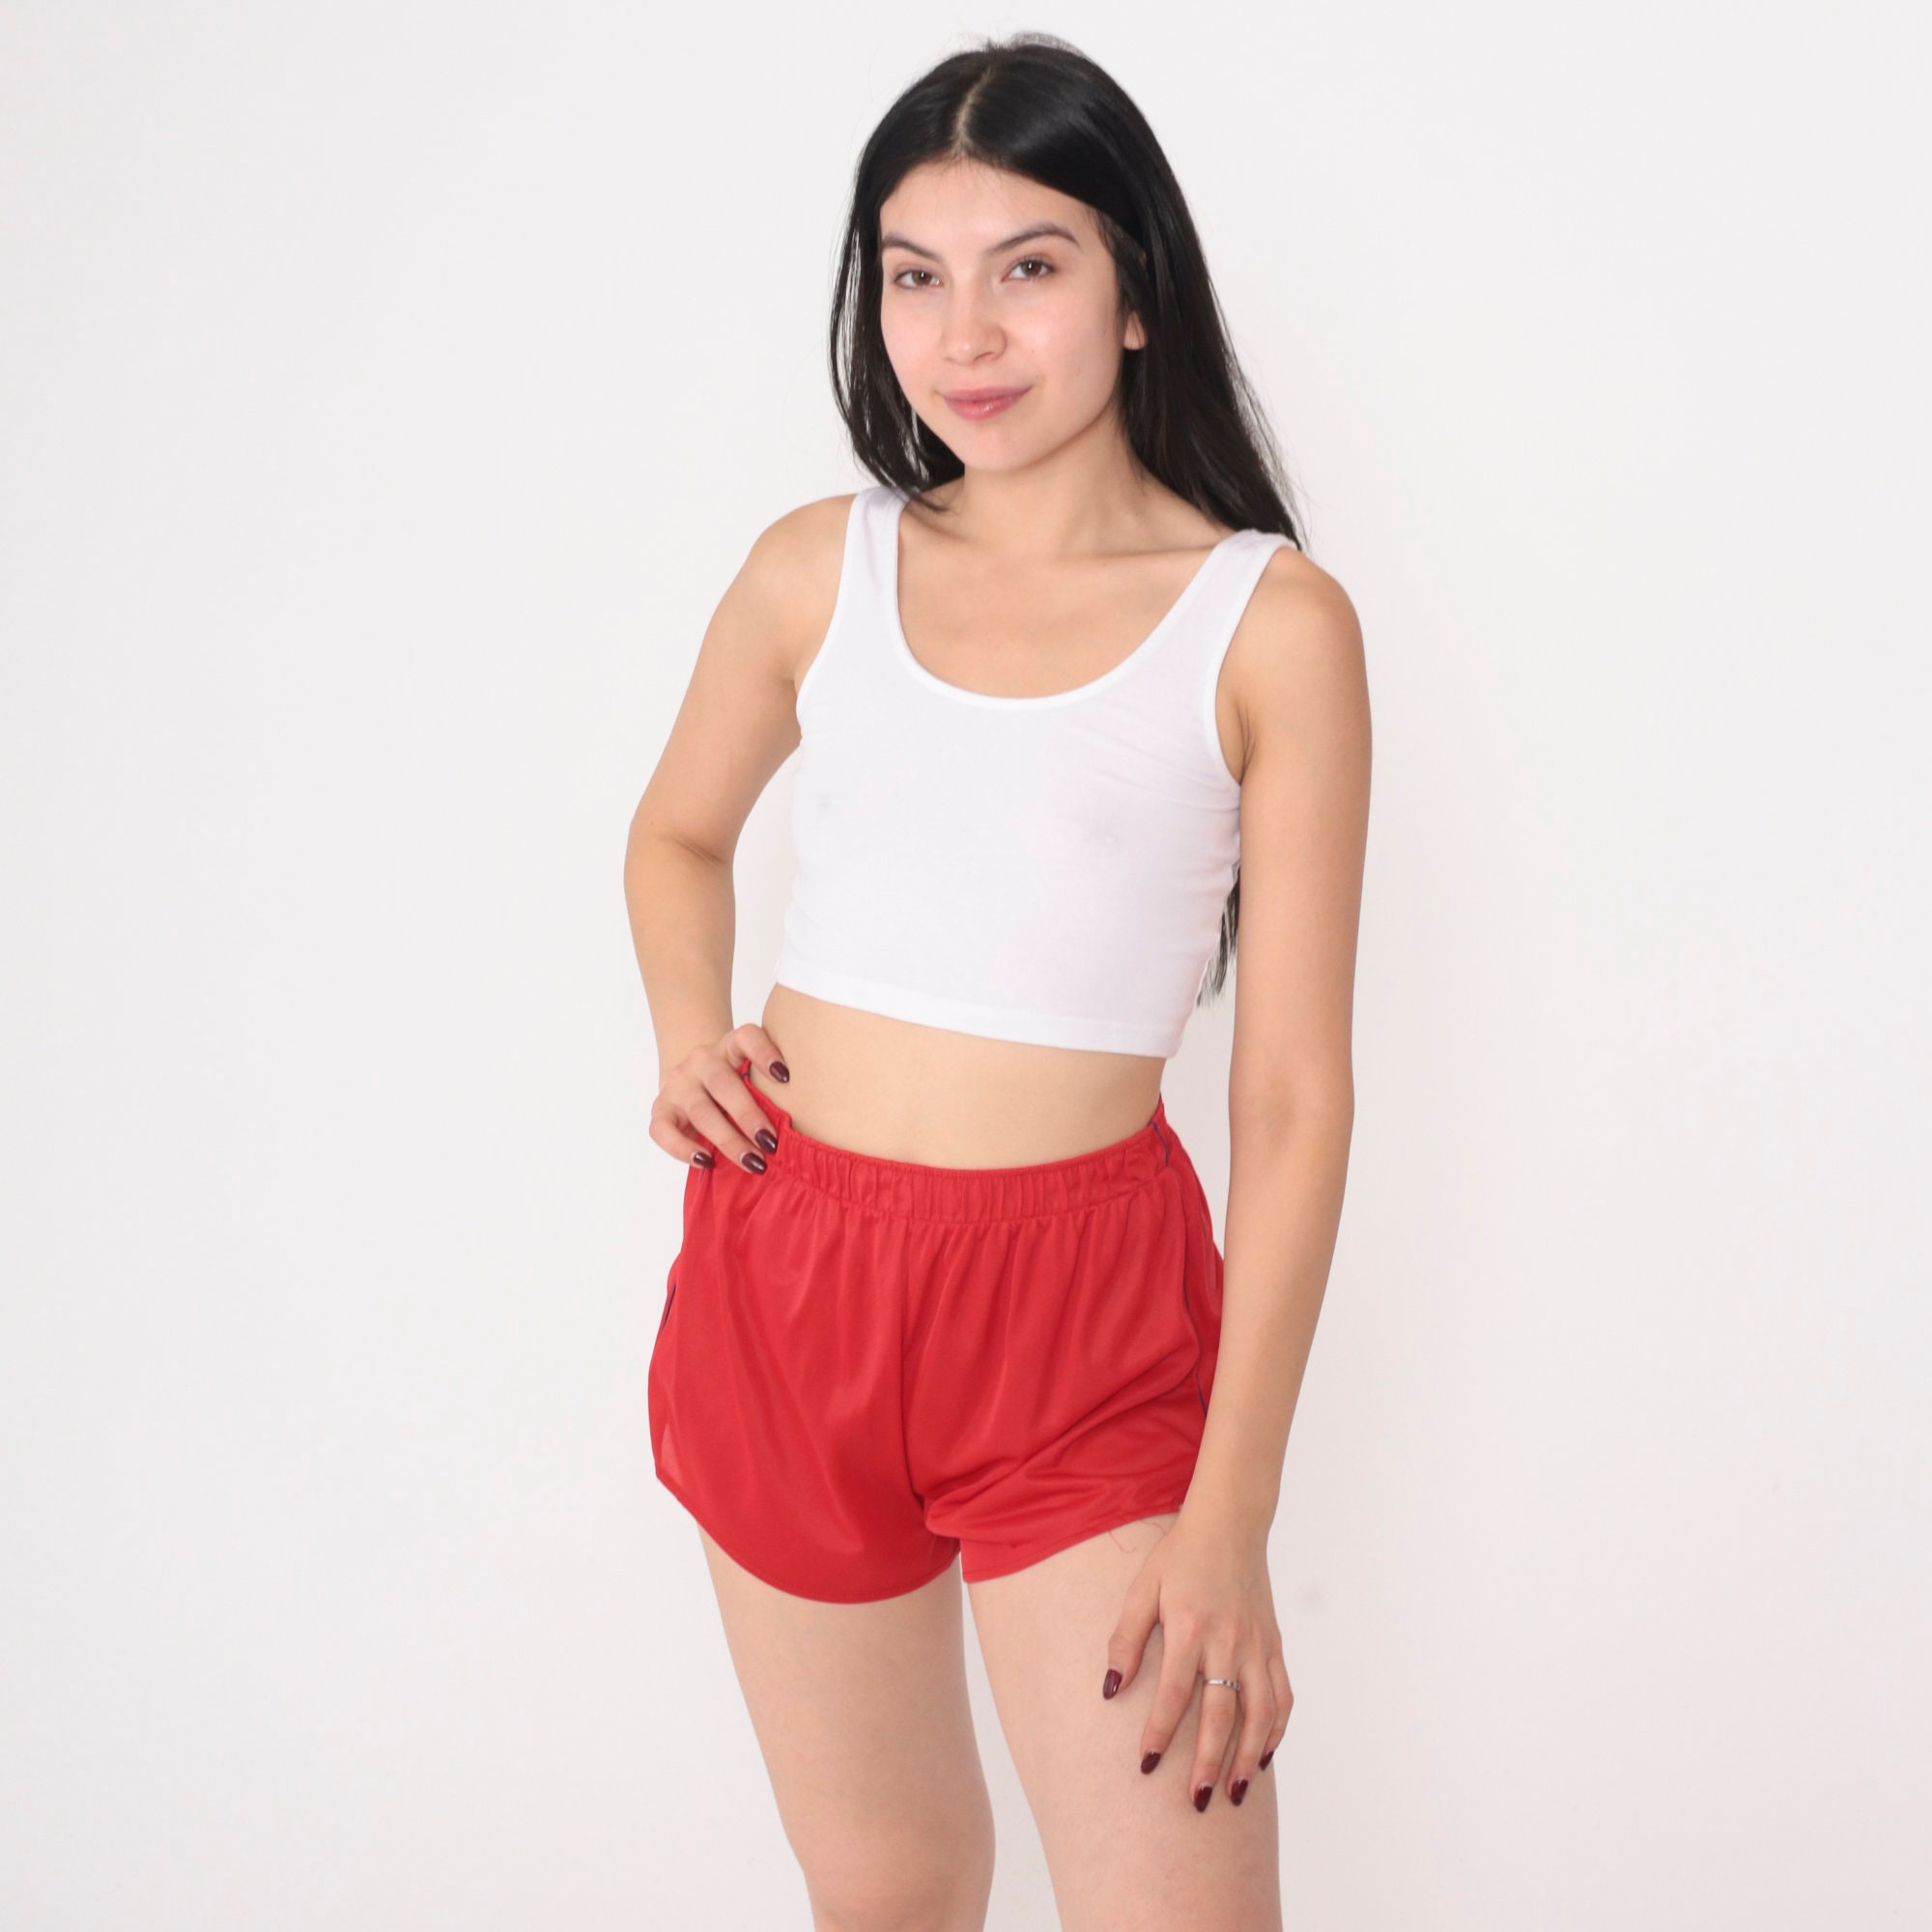 Runner Island Heather Grey Retro Dolphin Shorts and Crop Top